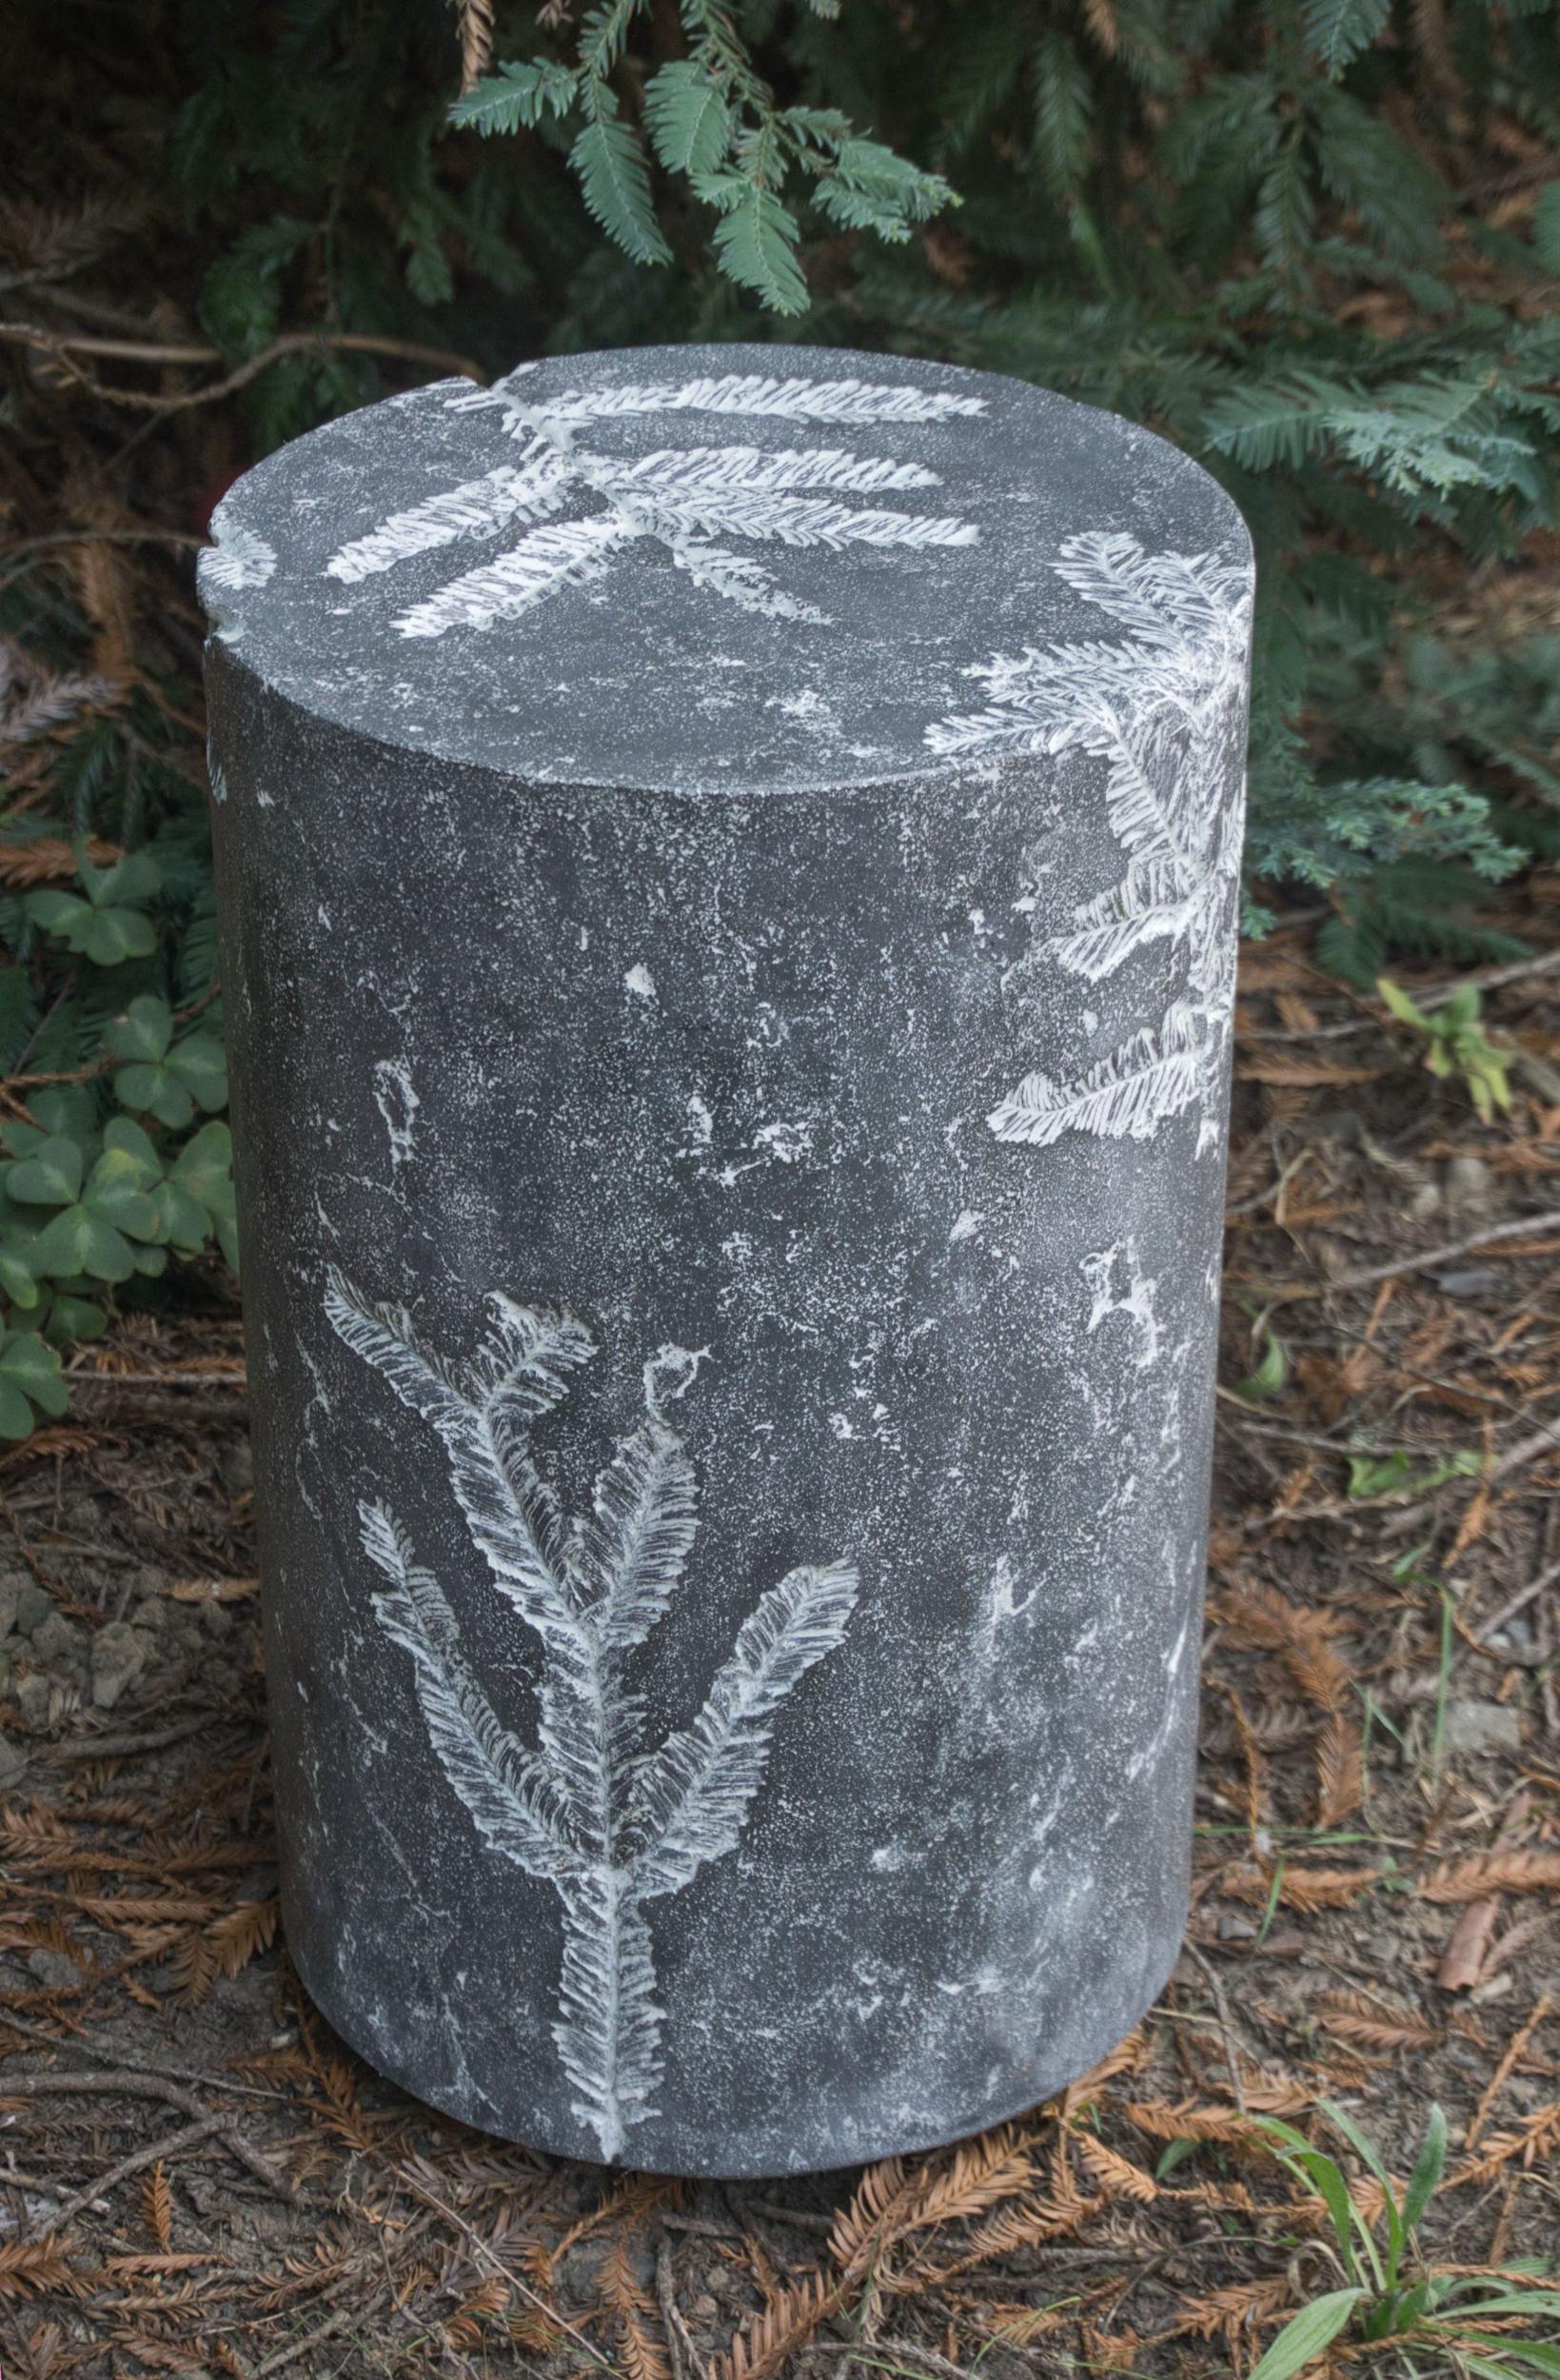 These highly customizable lightweight concrete side or coffee tables or stools with leaf impressions from real leaves can make a natural addition to nearly any room or outdoor environment. The fossil-like leaf imprints soften the brutalist material